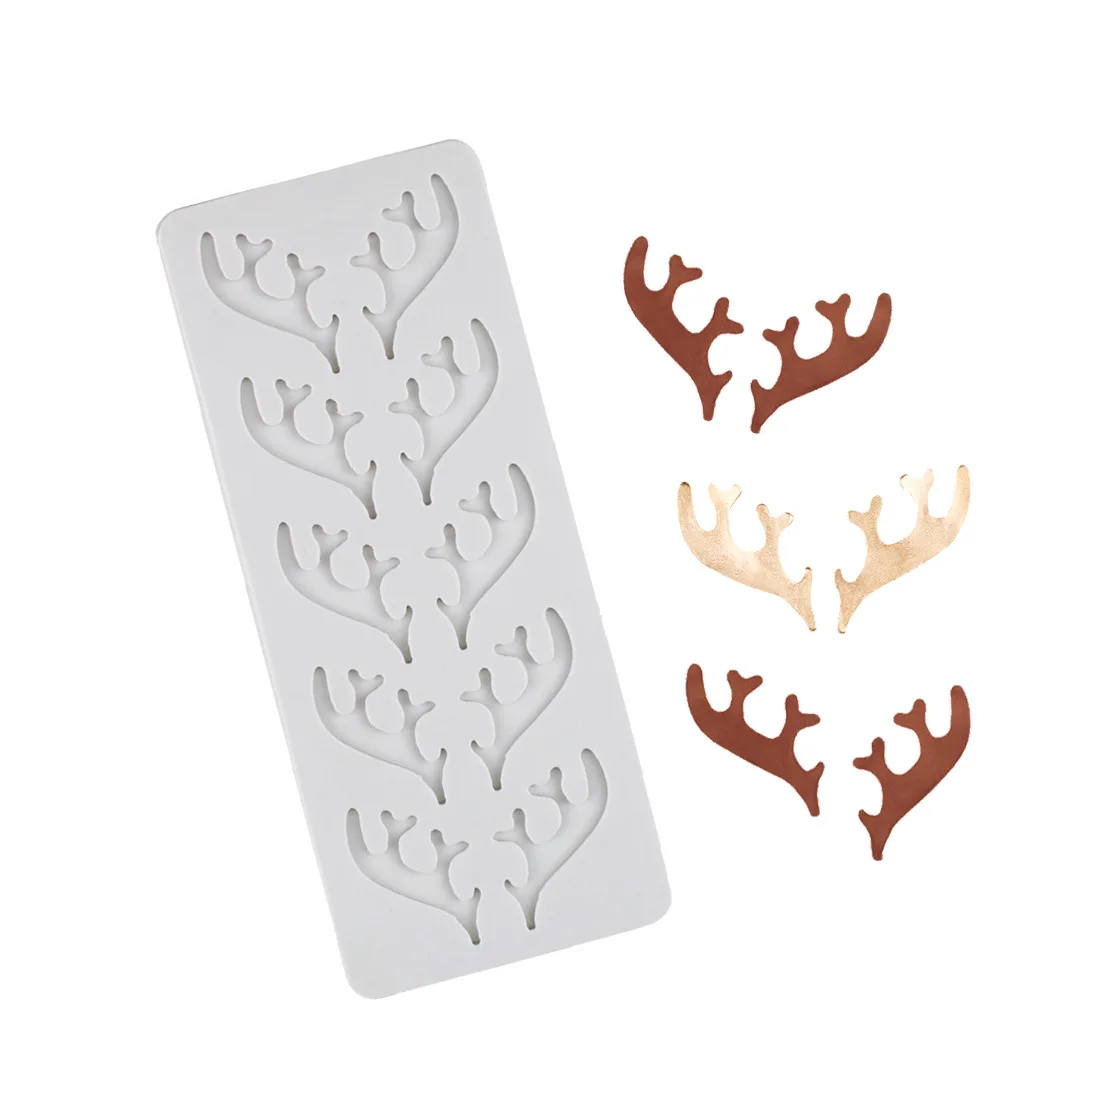 

3D Deer Antler Pastry Silicone Mold DIY Christmas Elk Fudge Chocolate Cake Baking Cookies Decor Tools Clay Plaster Resin Moulds